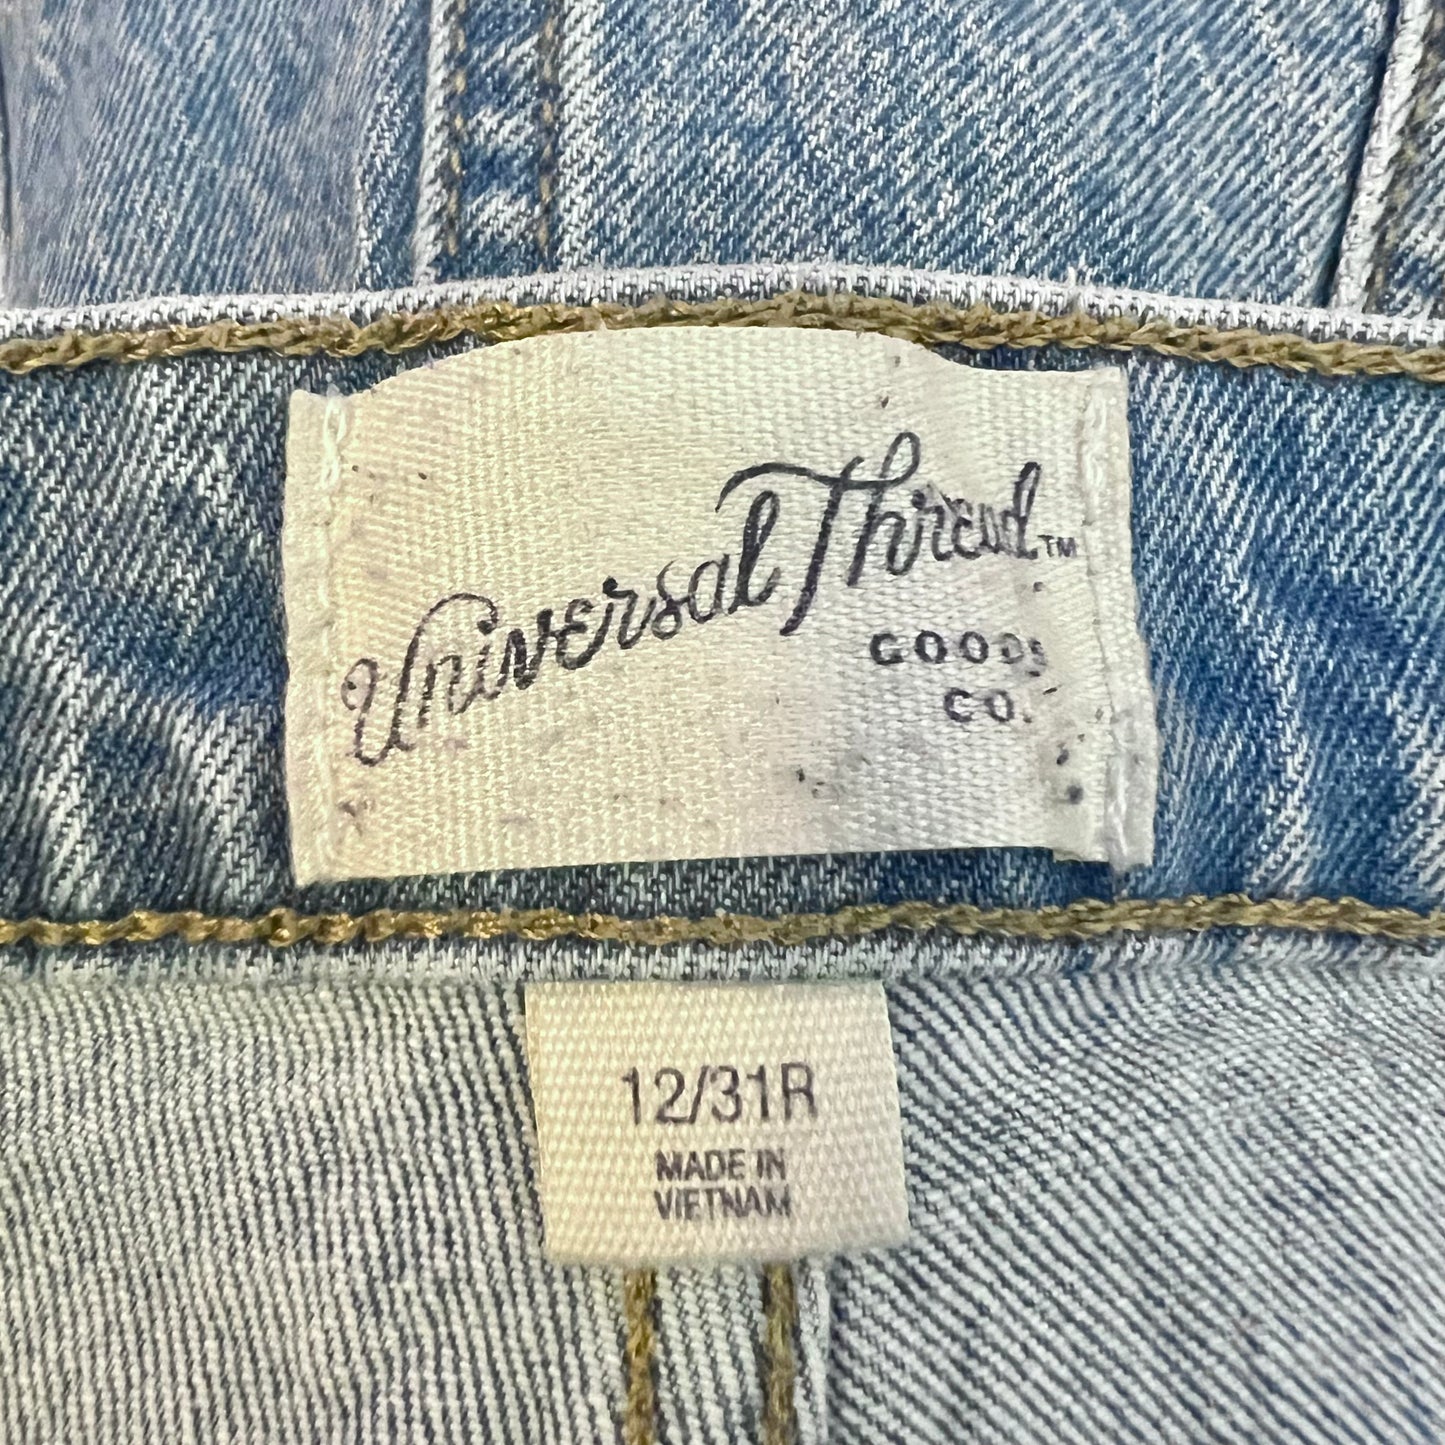 Jeans Straight By Universal Thread  Size: 12